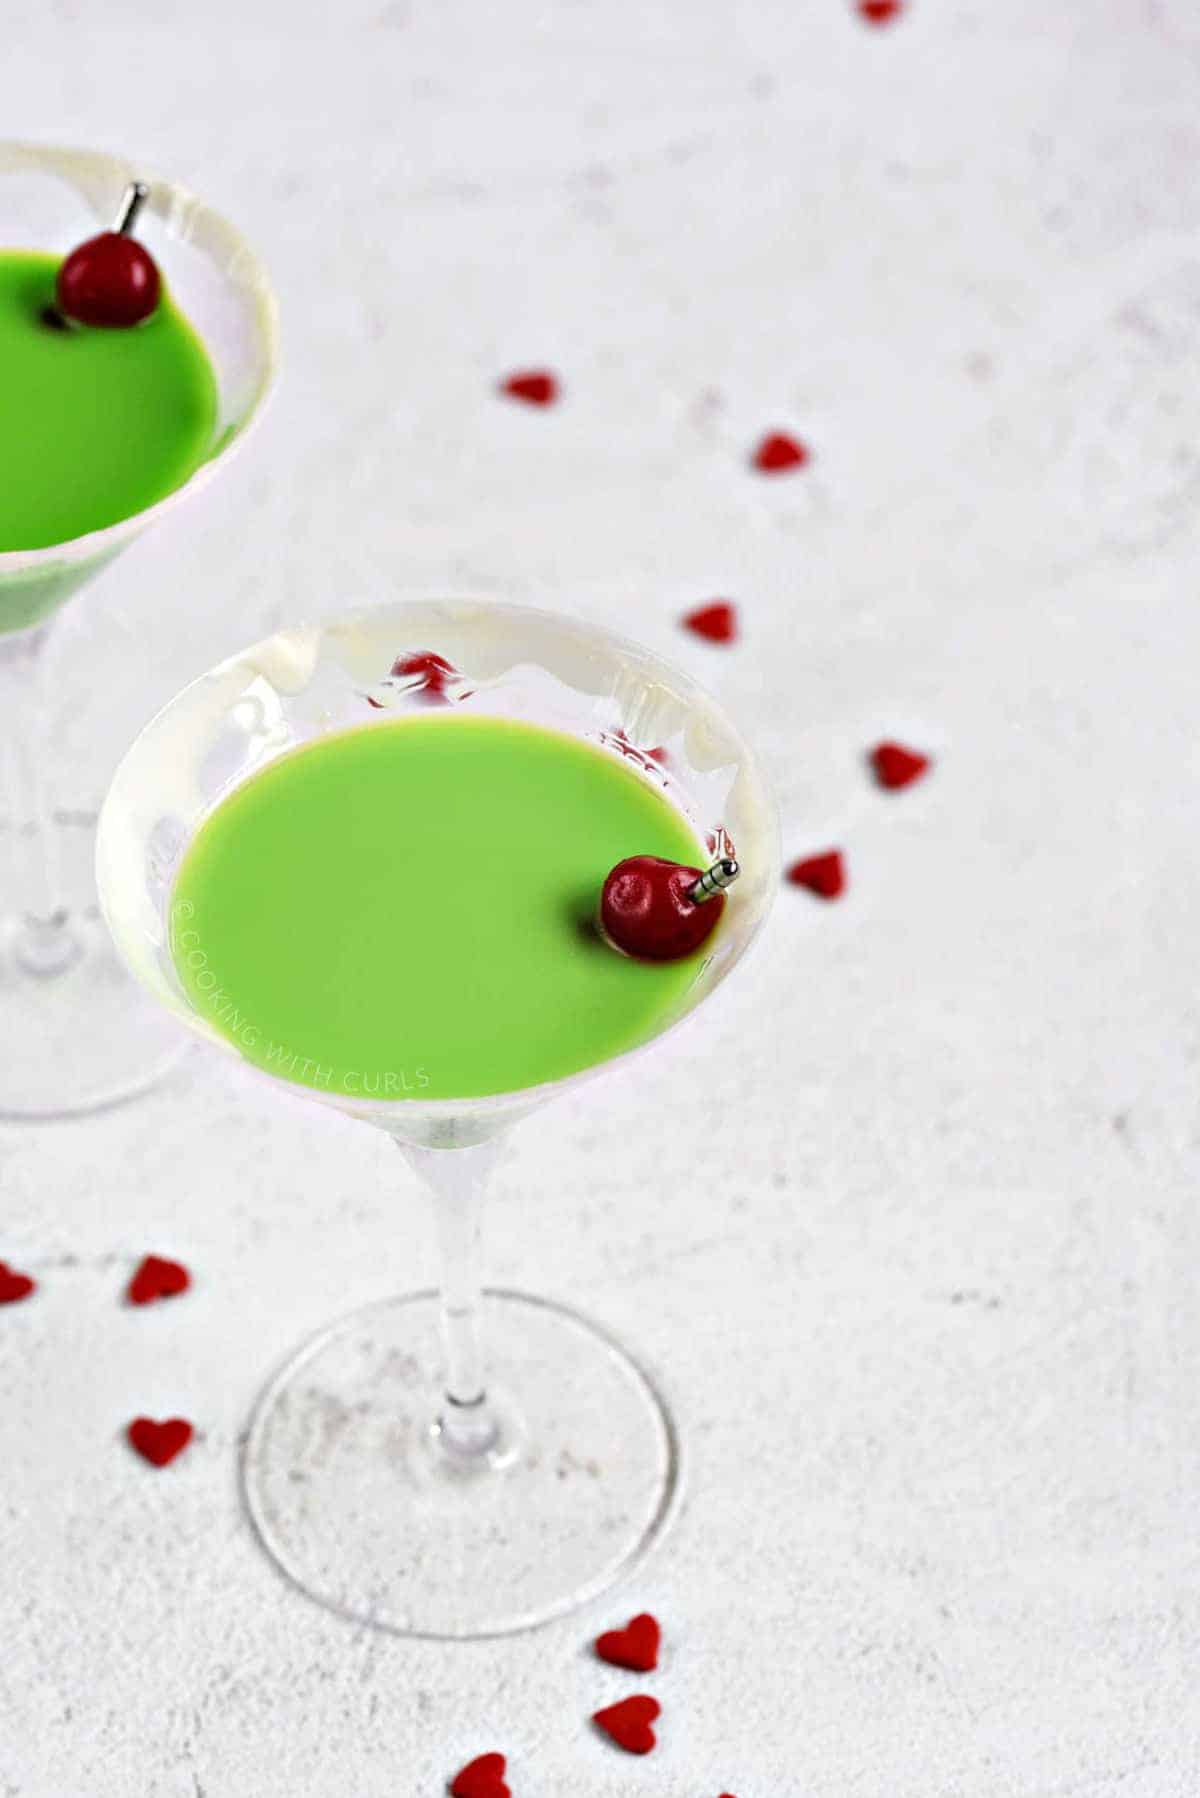 Two martini glasses filled with a green Grinch vodka martini with a cherry garnish surrounded by tiny red heart candies.